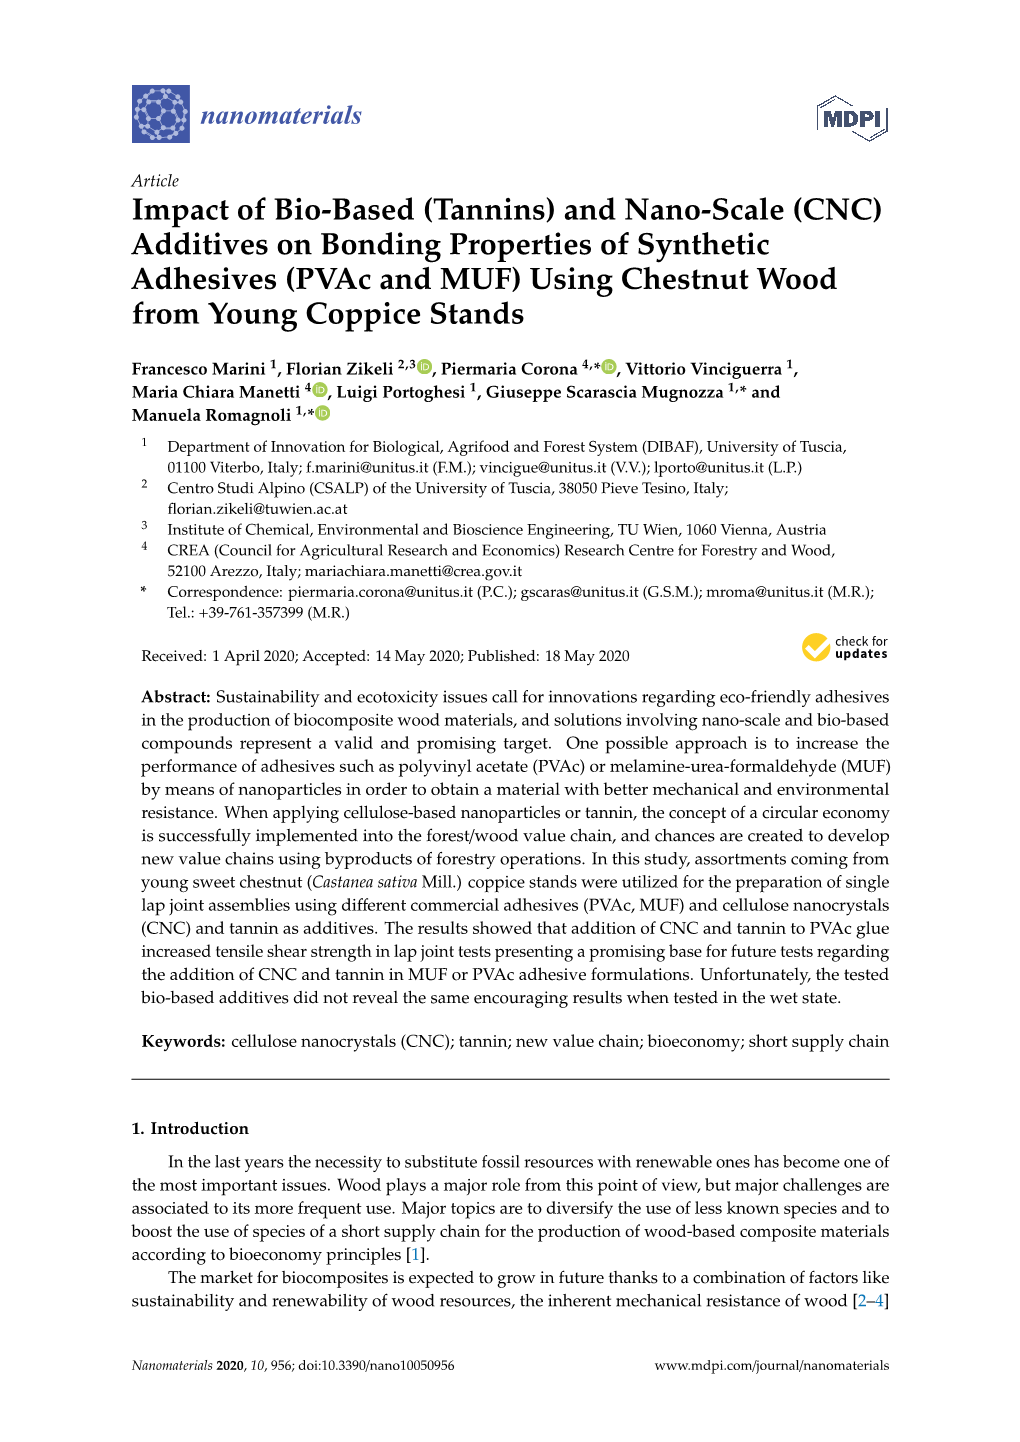 (CNC) Additives on Bonding Properties of Synthetic Adhesives (Pvac and MUF) Using Chestnut Wood from Young Coppice Stands